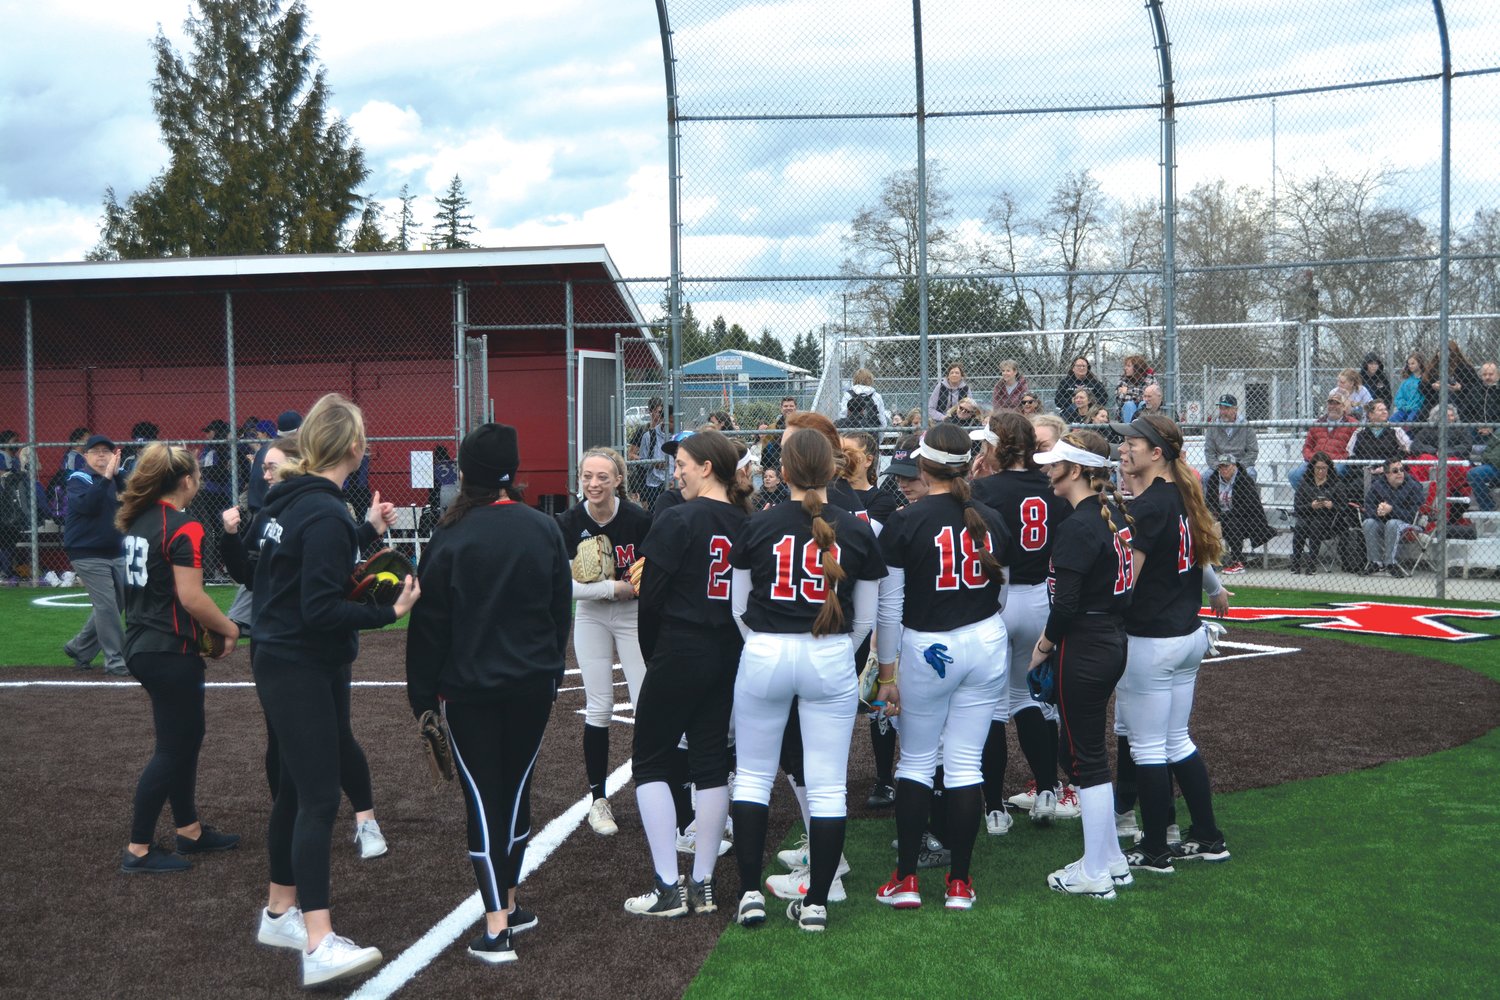 Drea Schwaier, Tayelyn Cutler, Ashley Ellis and Taylor Gubser embrace the 2022 Yelm fastpitch team prior to their matchup with North Thurston.